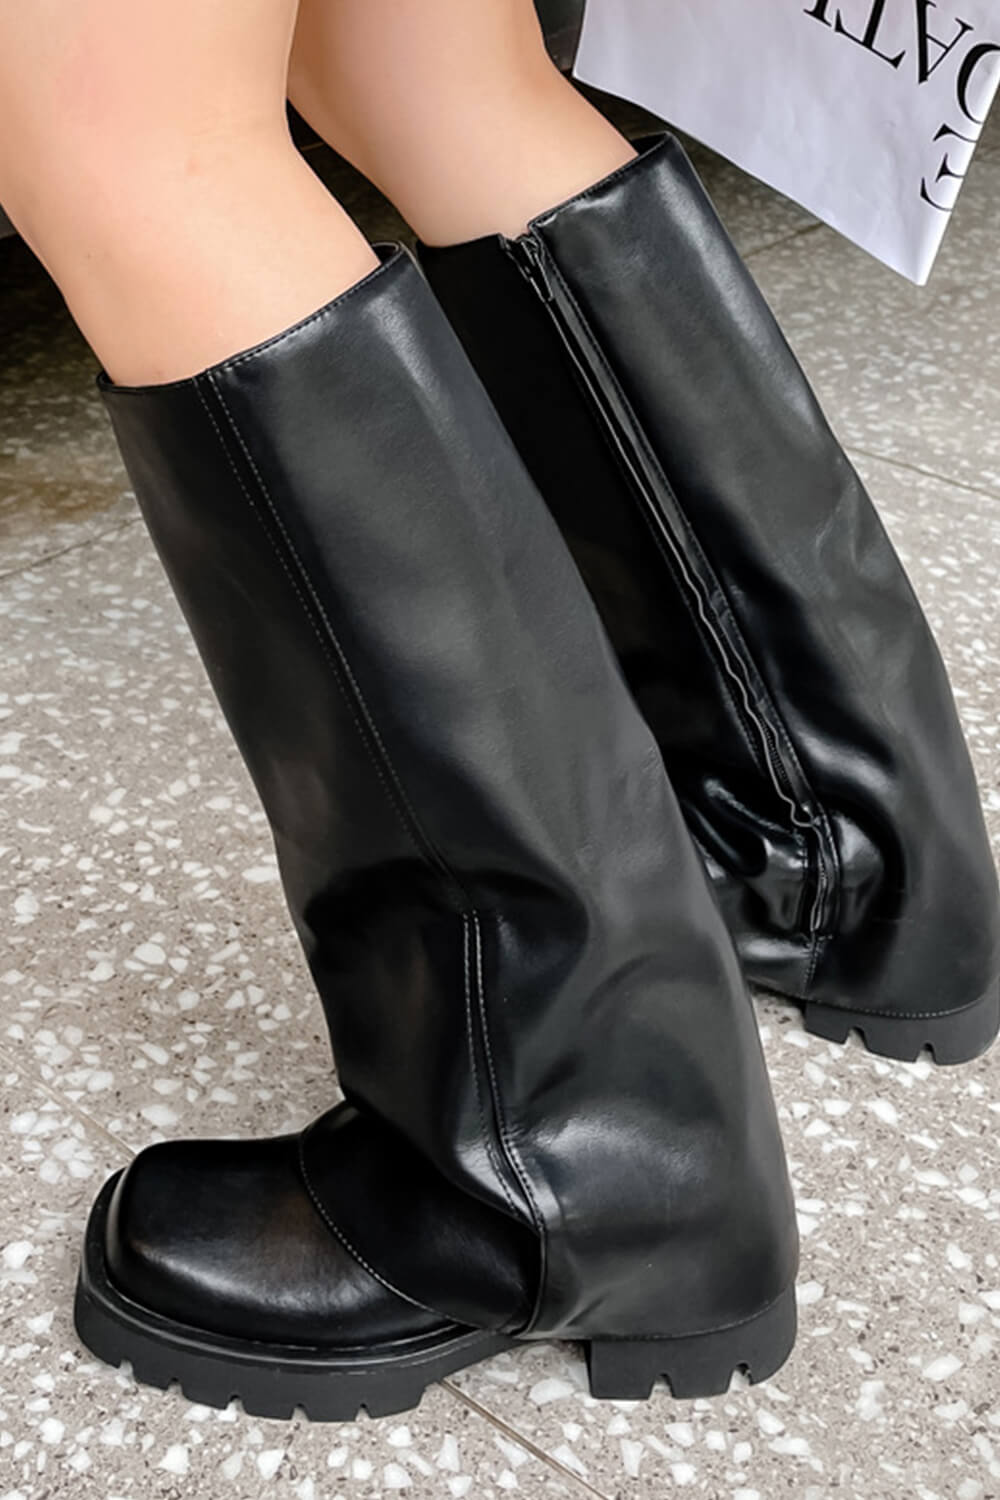 Calf Leather Foldover Ruched Square Toe Chunky Platform Knee High Boots